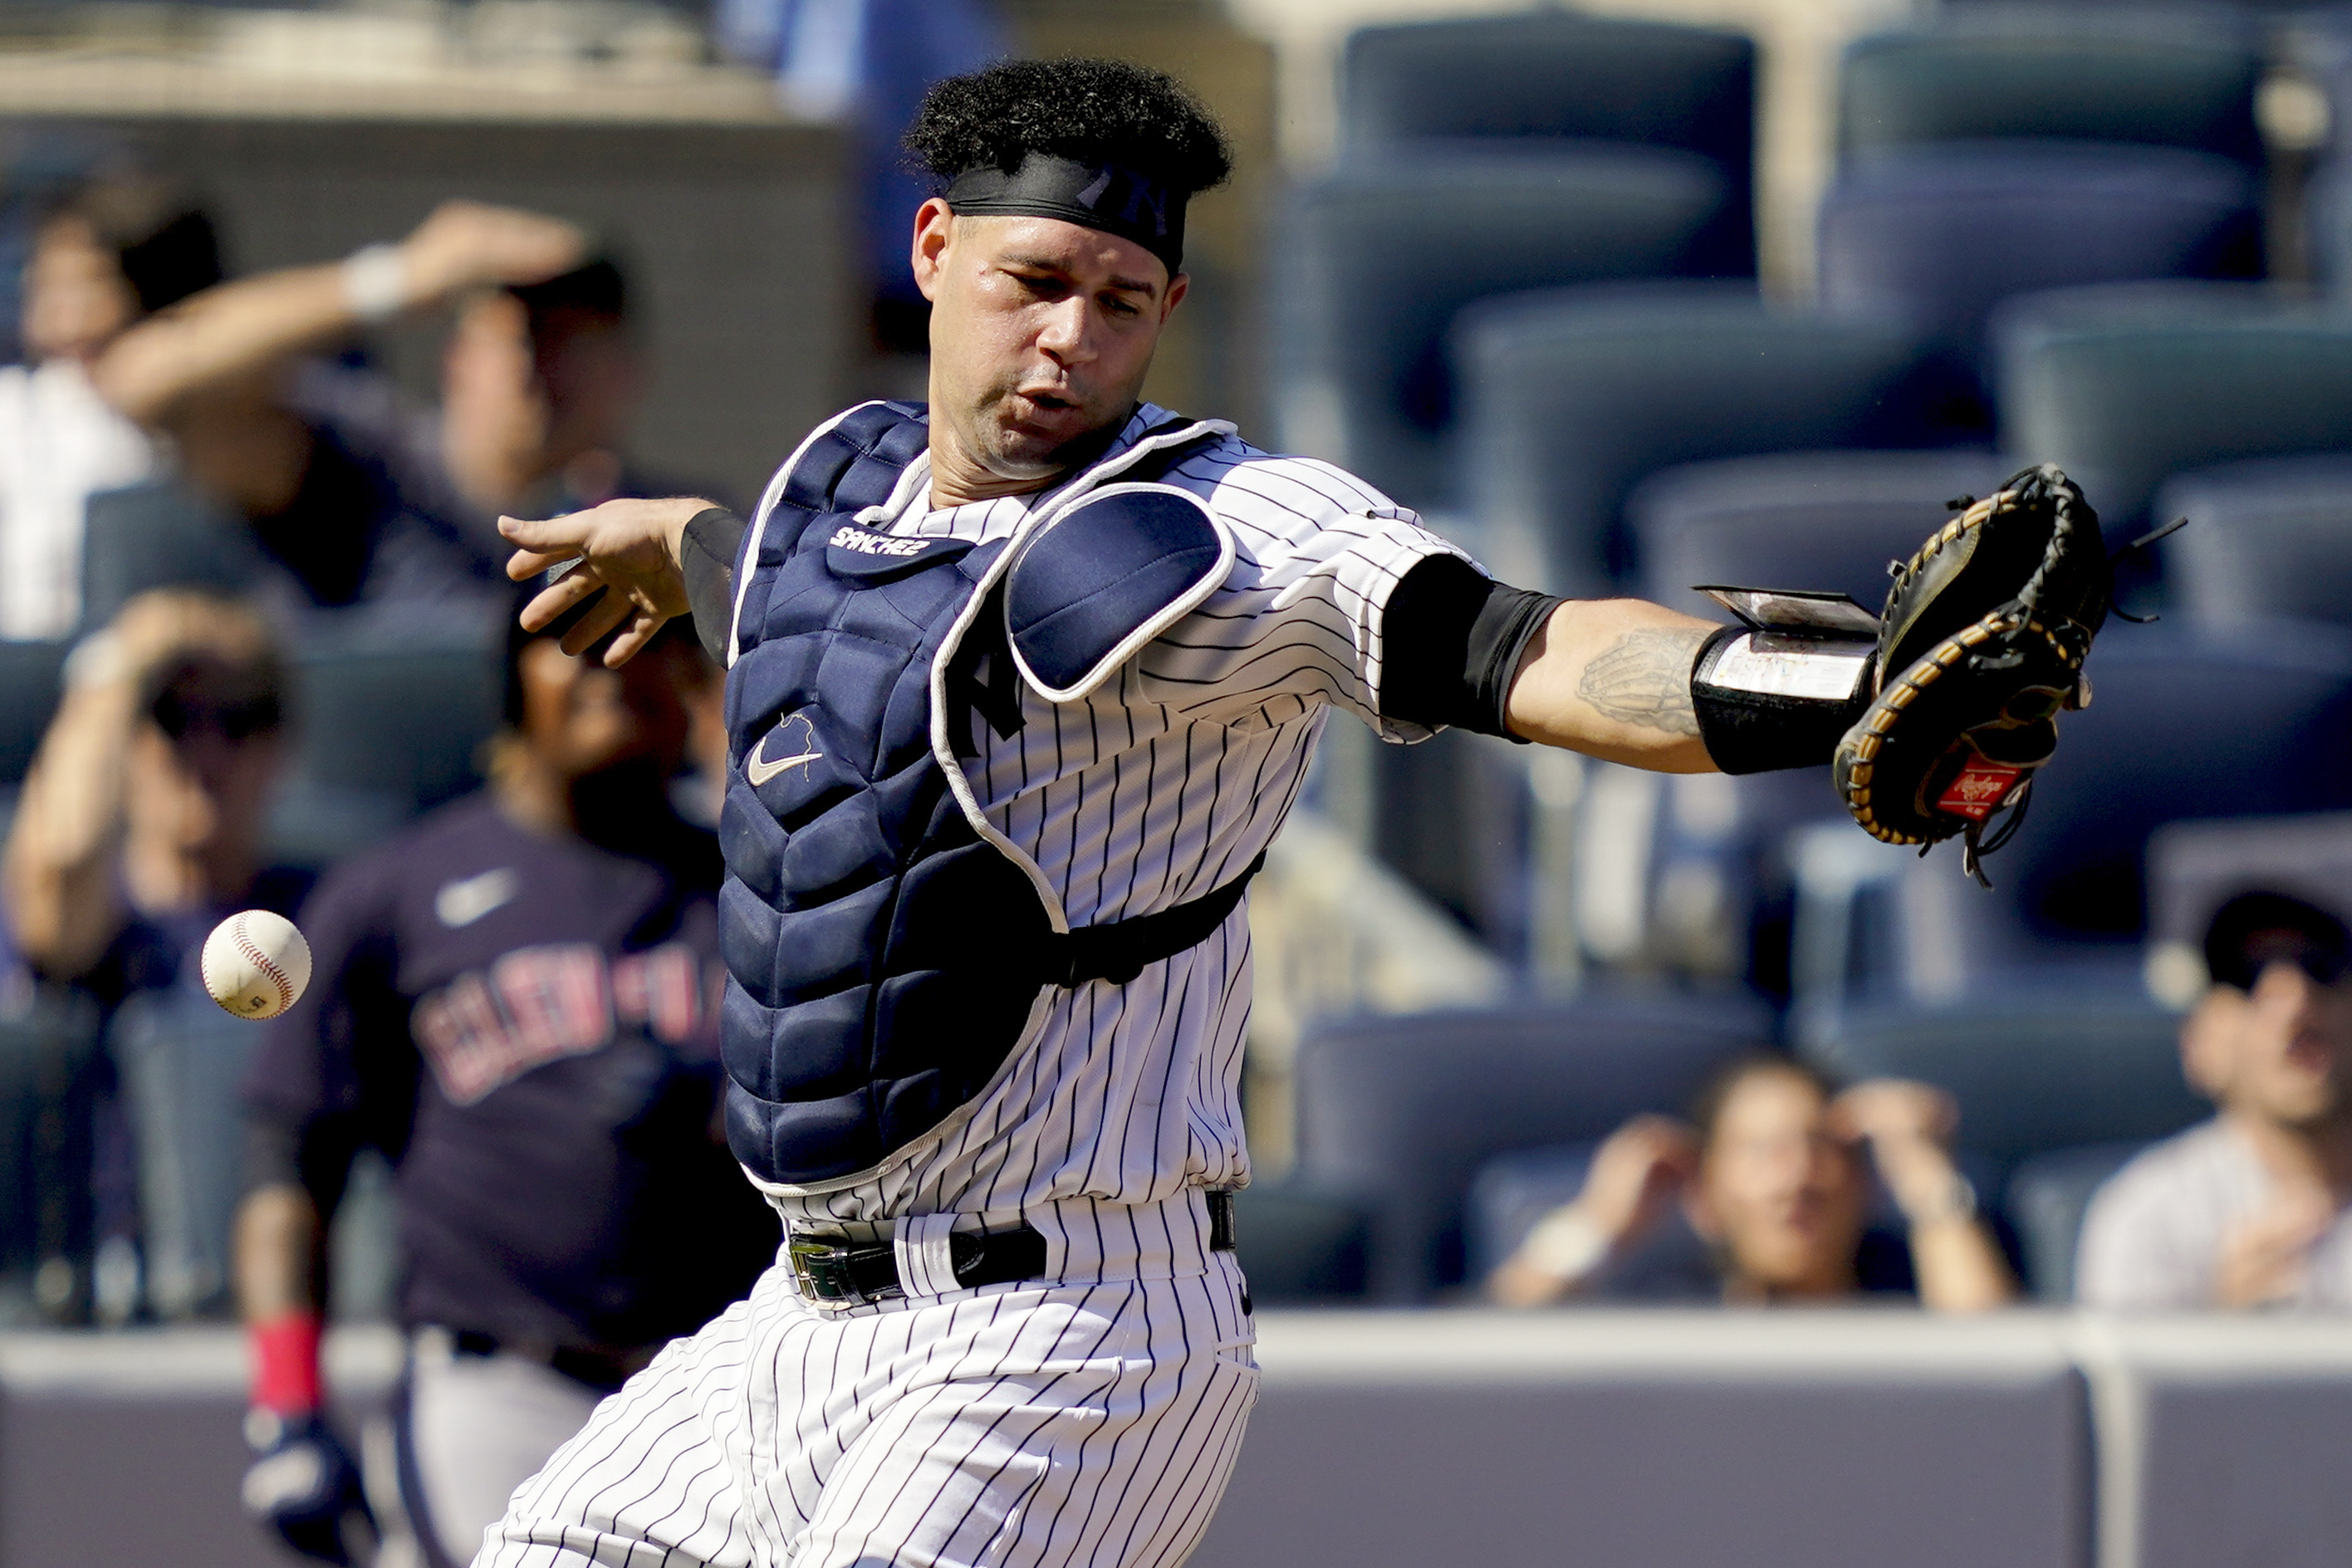 Gary Sanchez could be on move again after disappointing Twins season